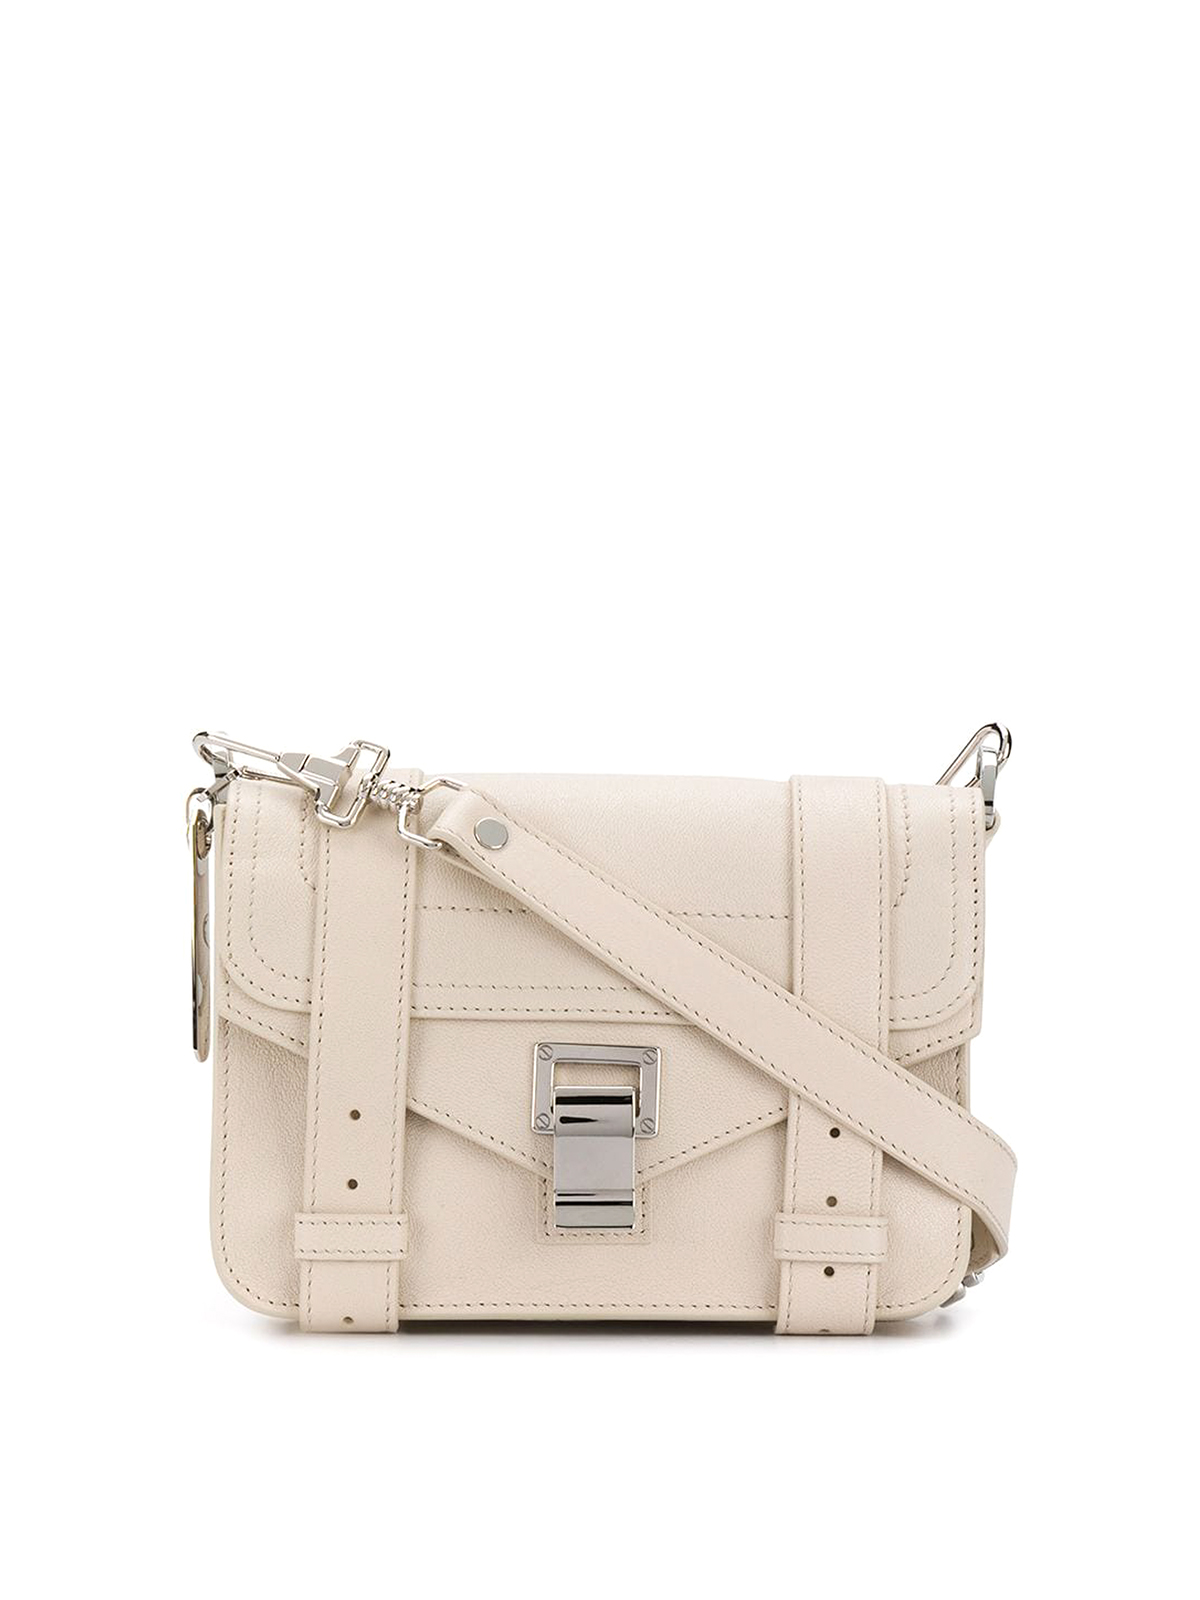 Shop Proenza Schouler Leather Flap Front Bag With Metal Tab Closure In White